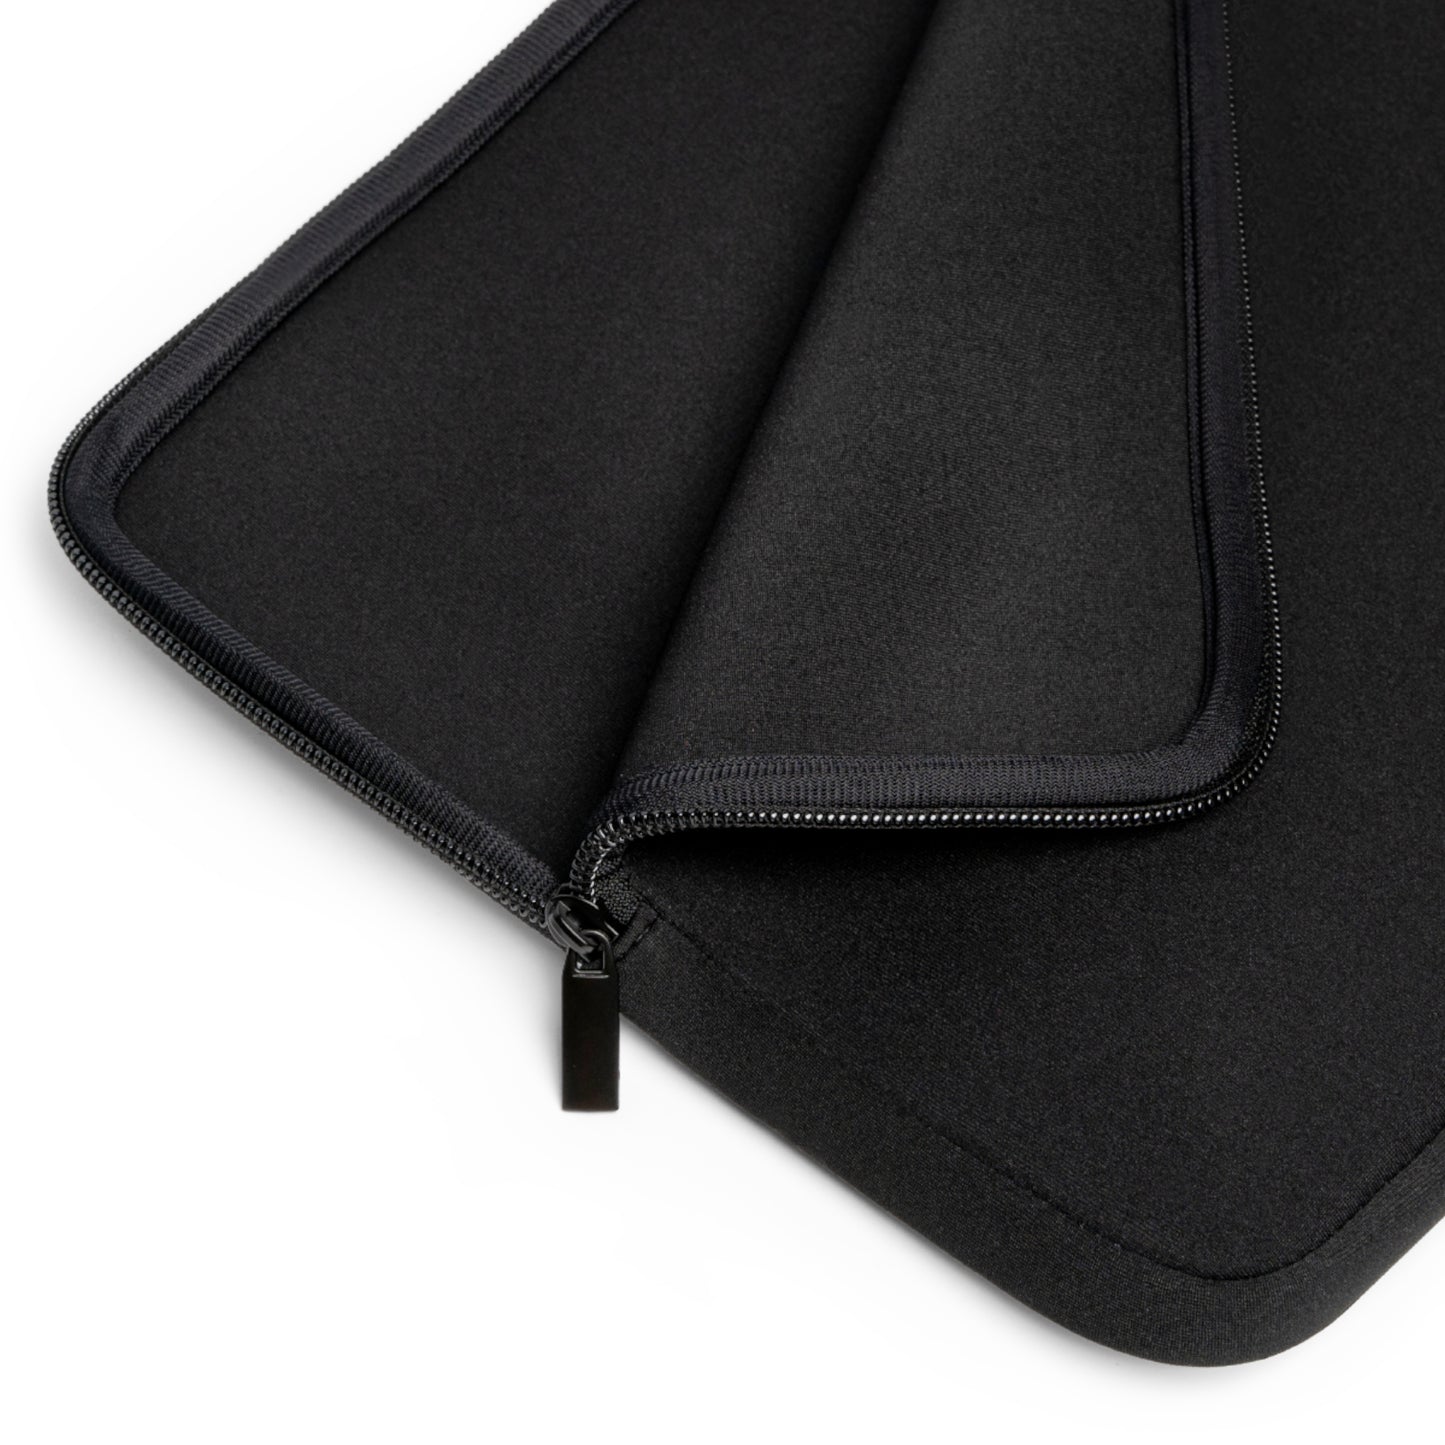 Common Grounds - Laptop Sleeve